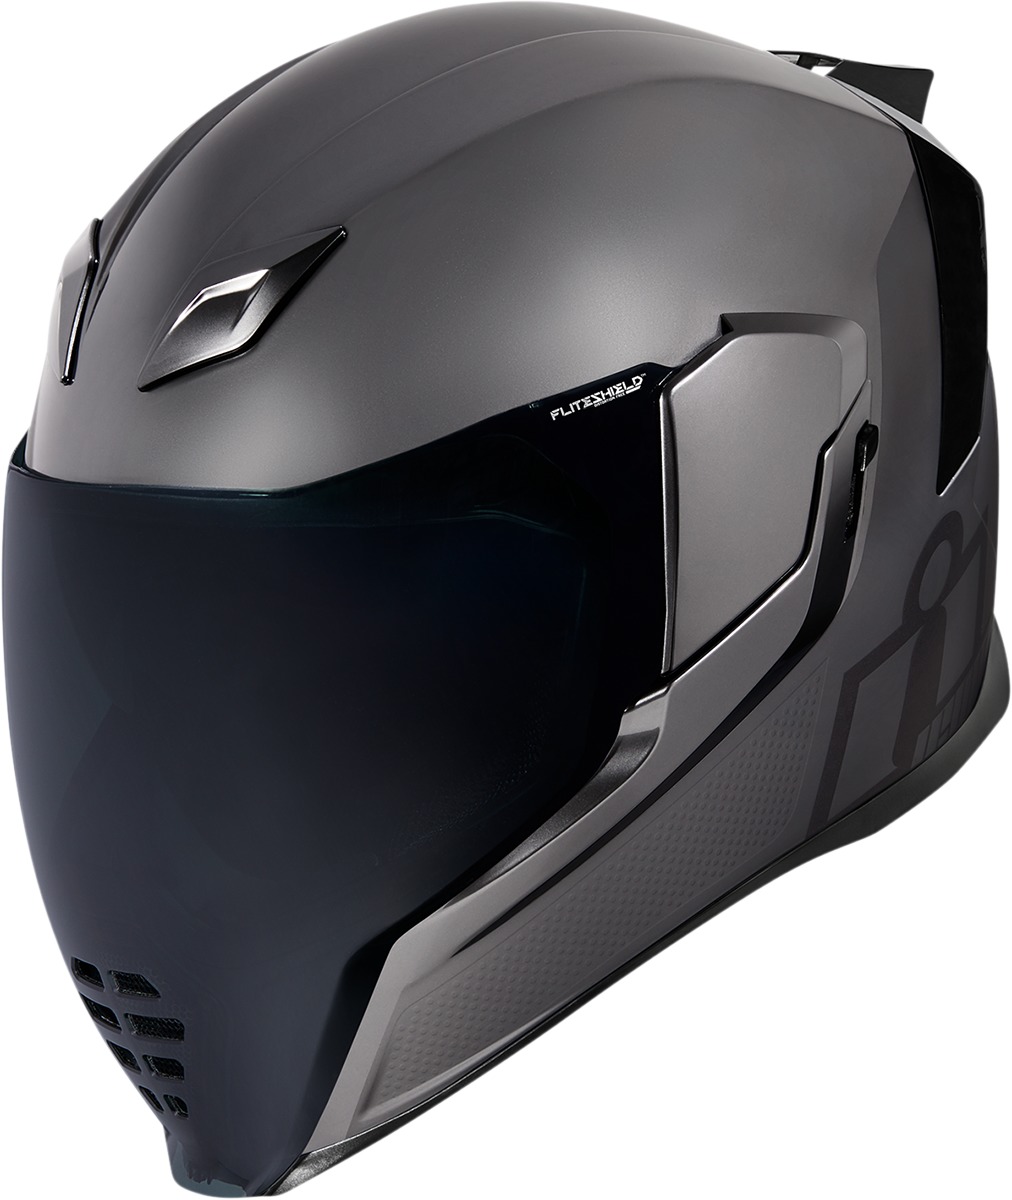 Silver Airflite Jewel MIPS Motorcycle Helmet - X-Large - Meets ECE 22.05 and DOT FMVSS-218 Standards - Click Image to Close